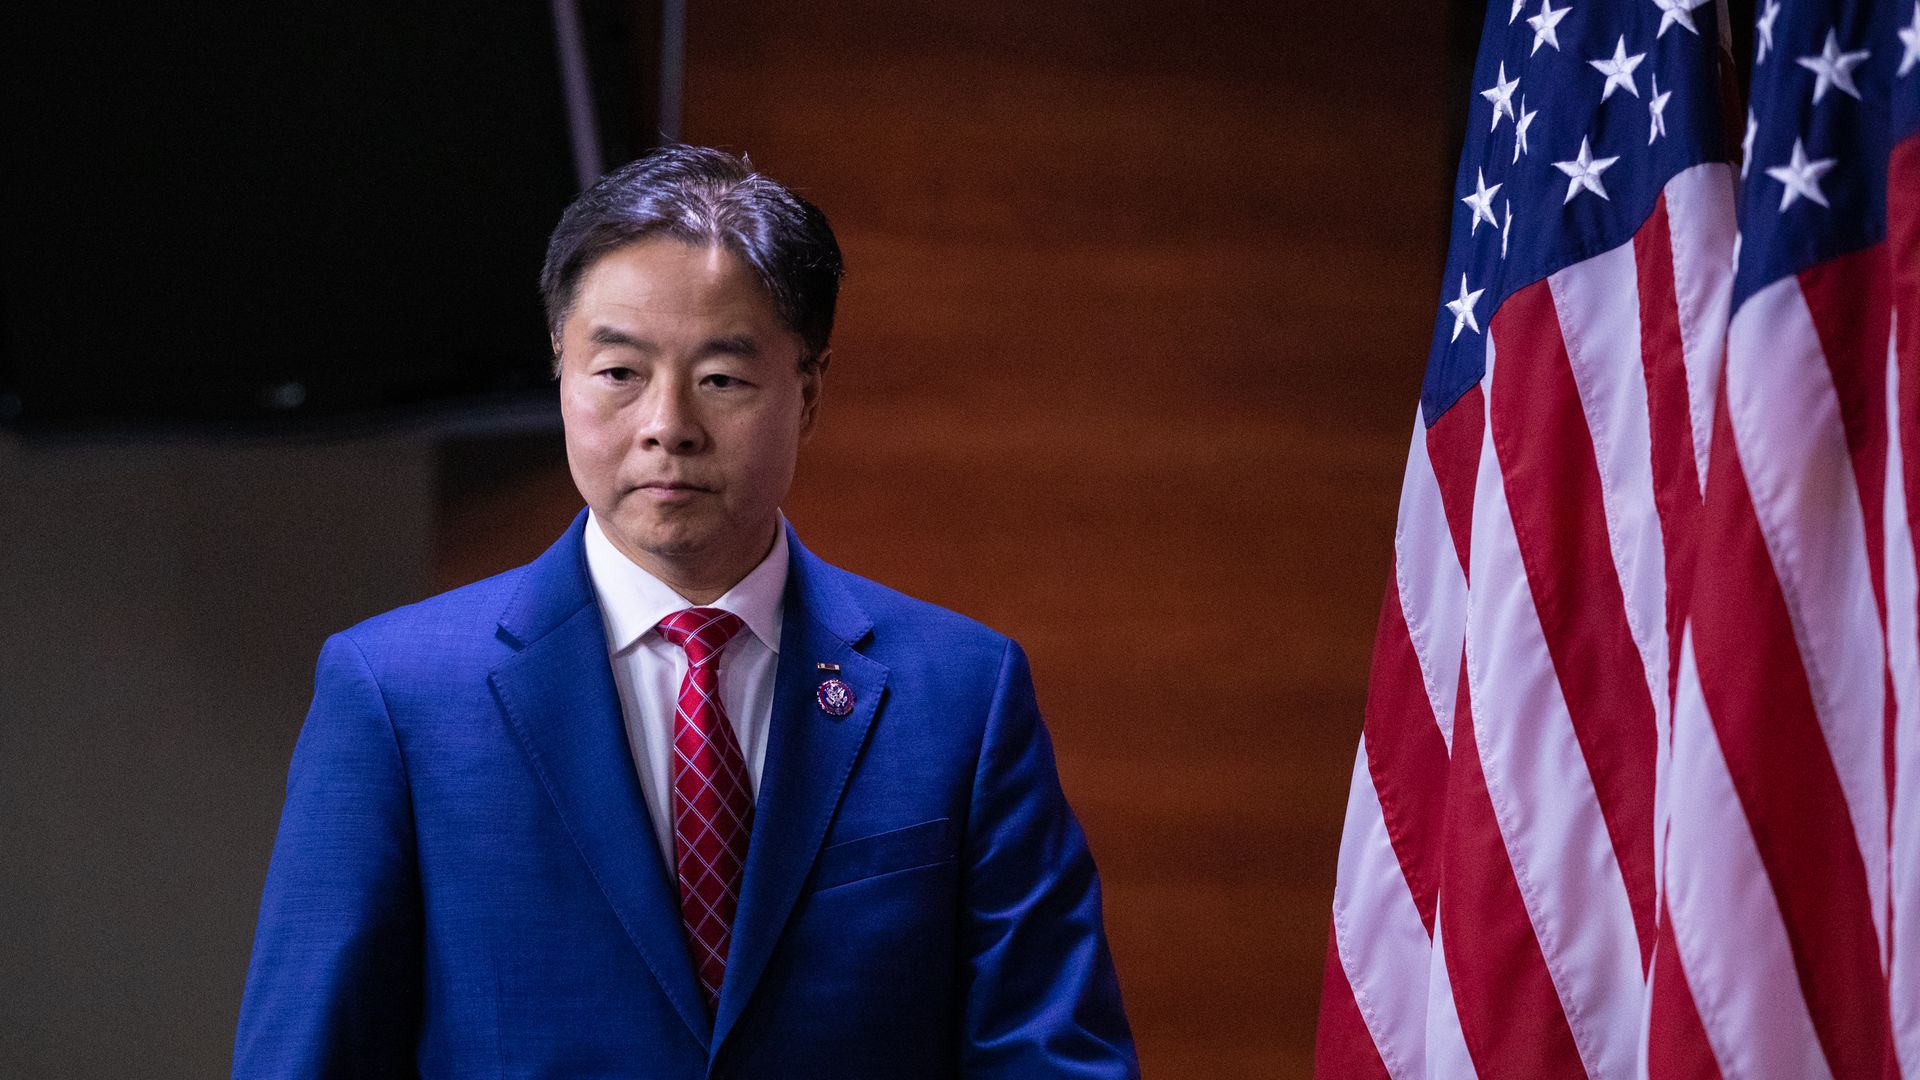 Rep. Ted Lieu is pictured in a blue suit next to a US flag